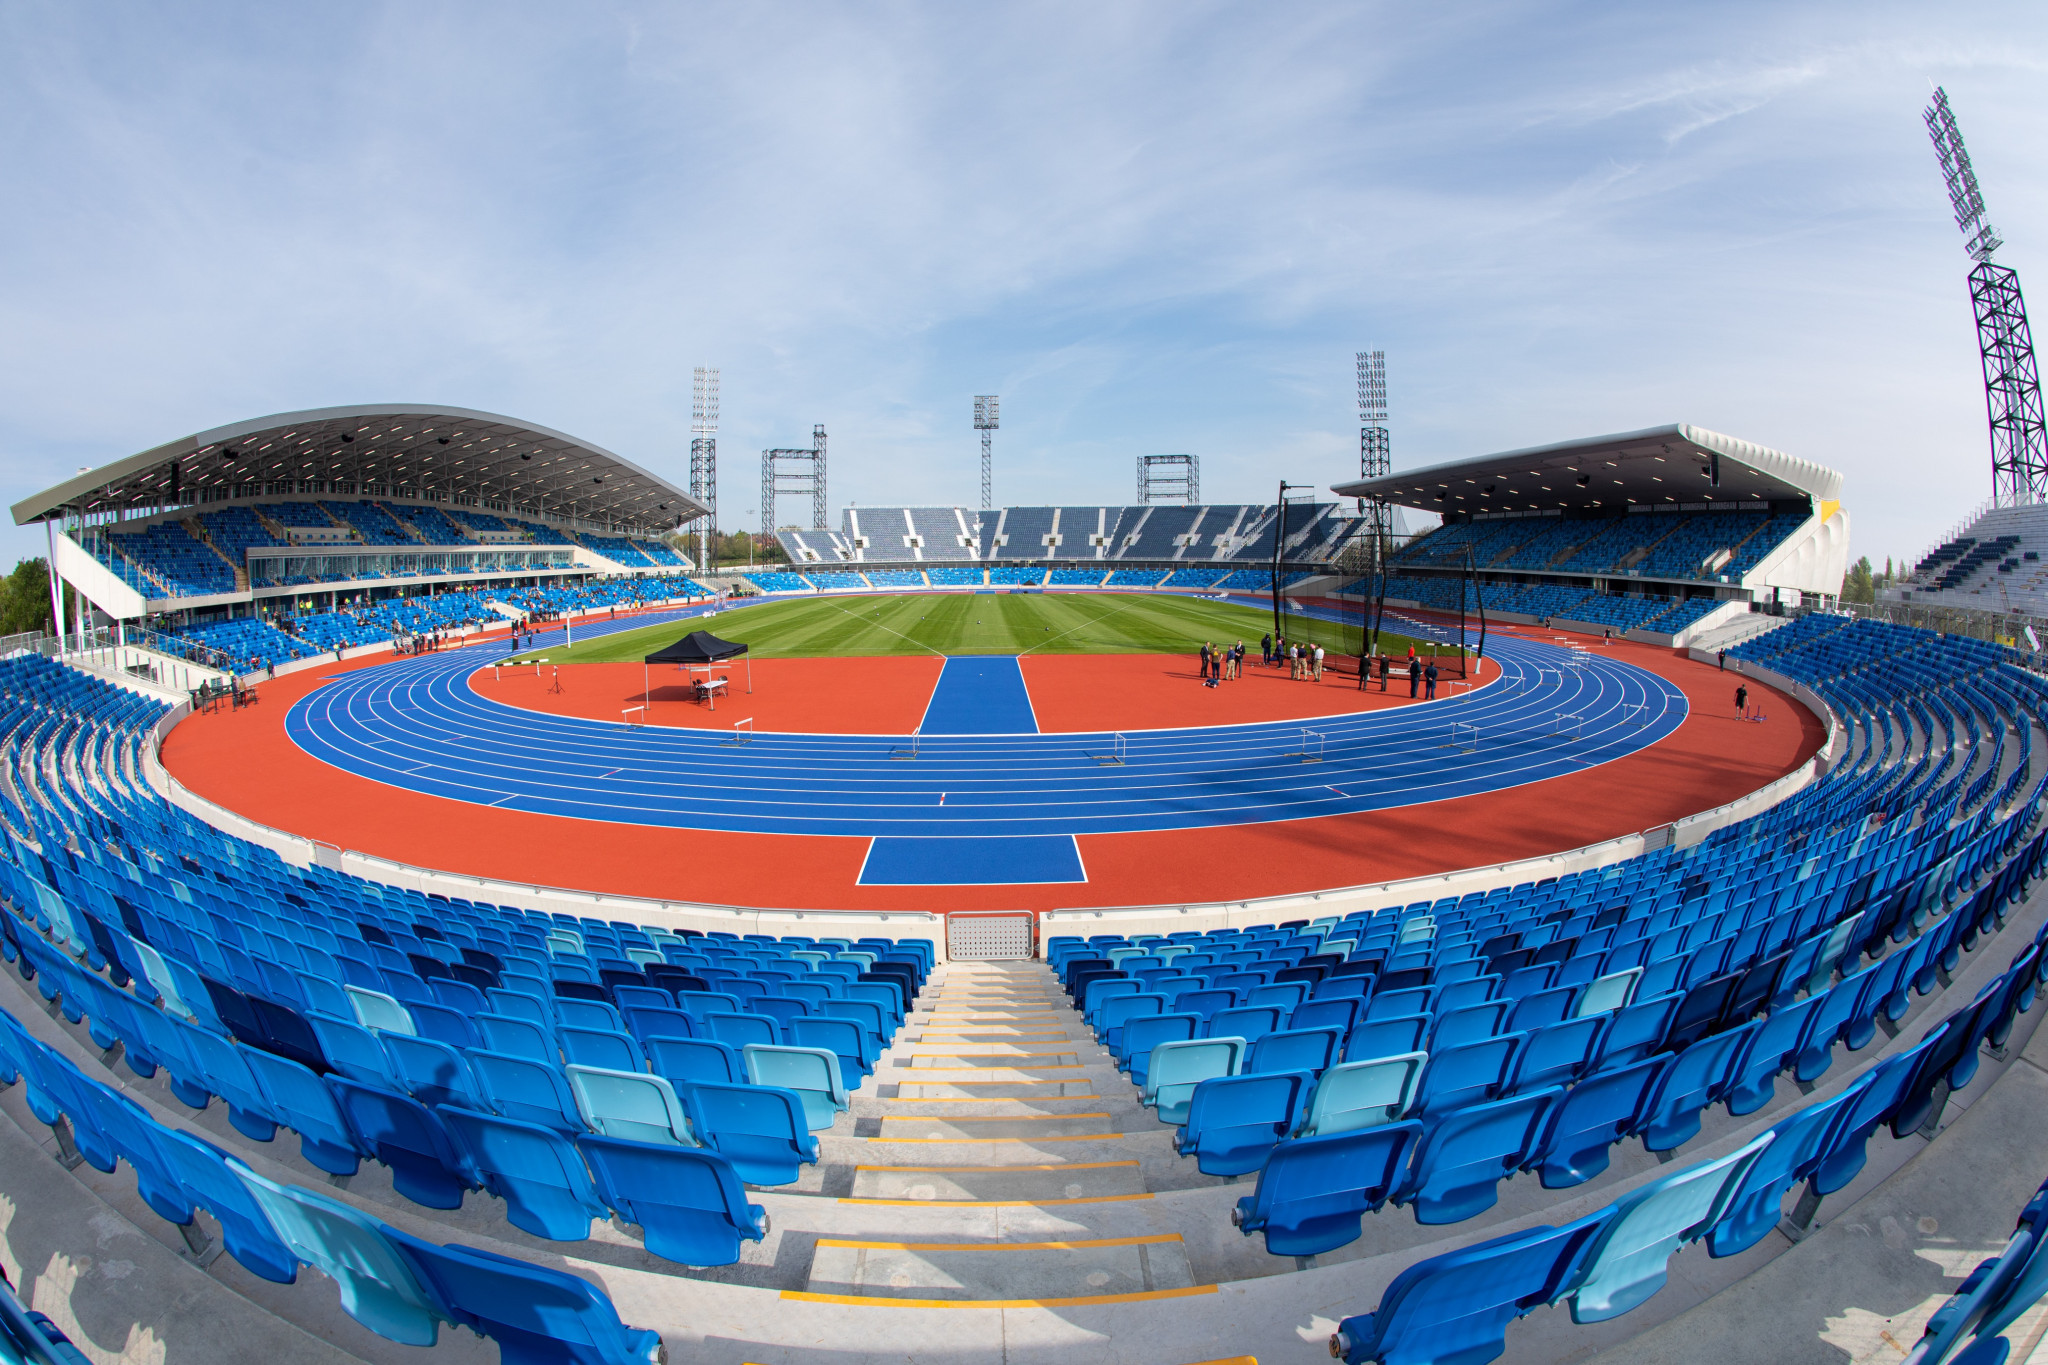 The Alexander Stadium is set to stage a Diamond League meeting next month before holding the Commonwealth Games, due to open on July 28 ©Birmingham City Council